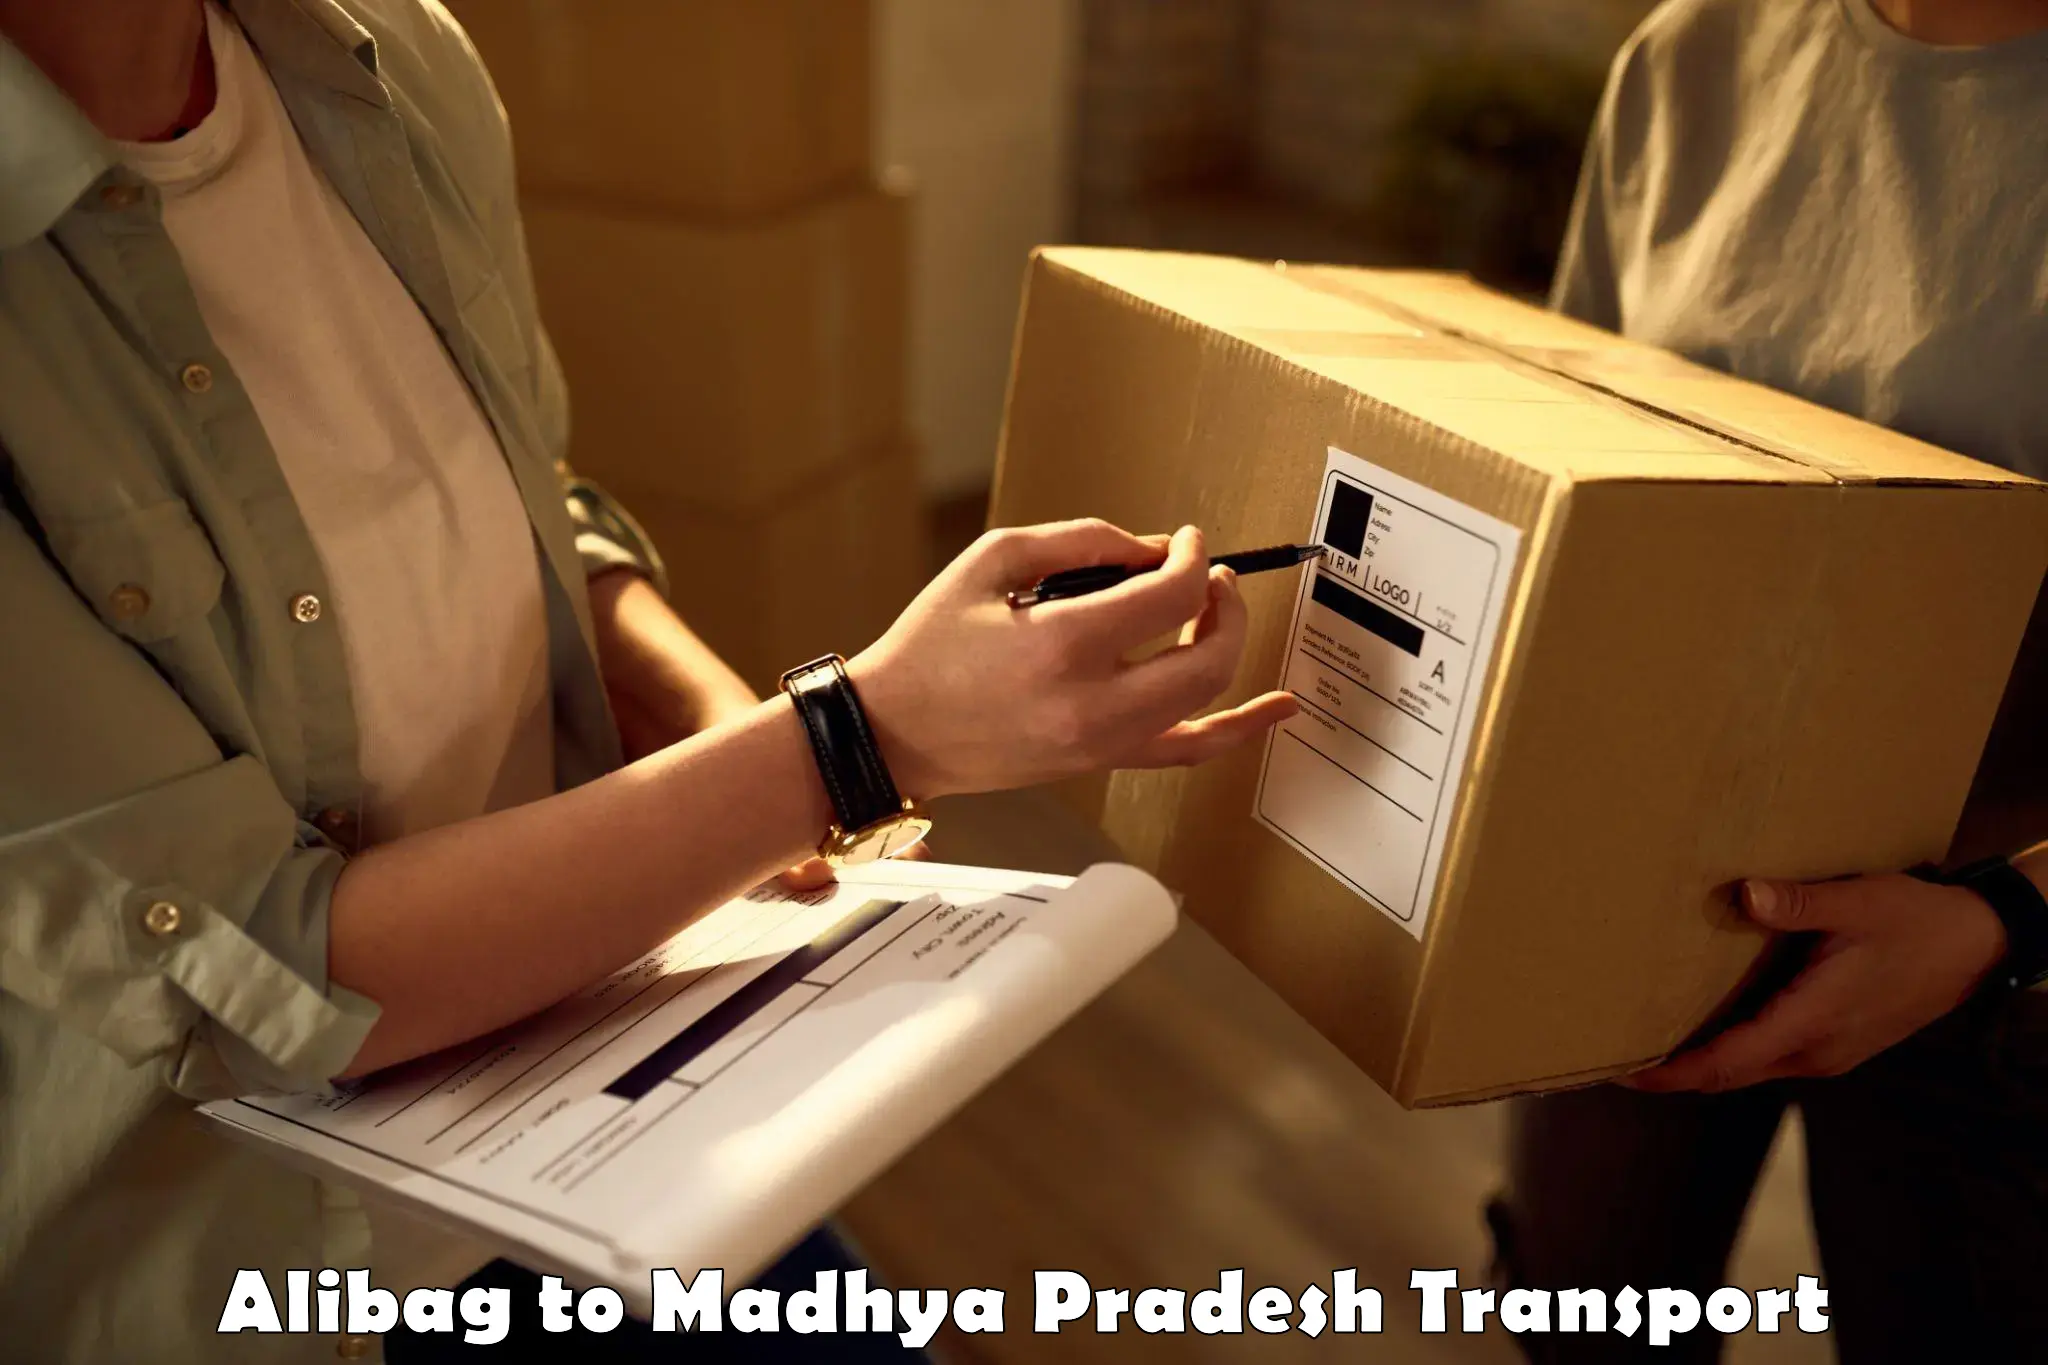 Shipping services Alibag to Gotegaon